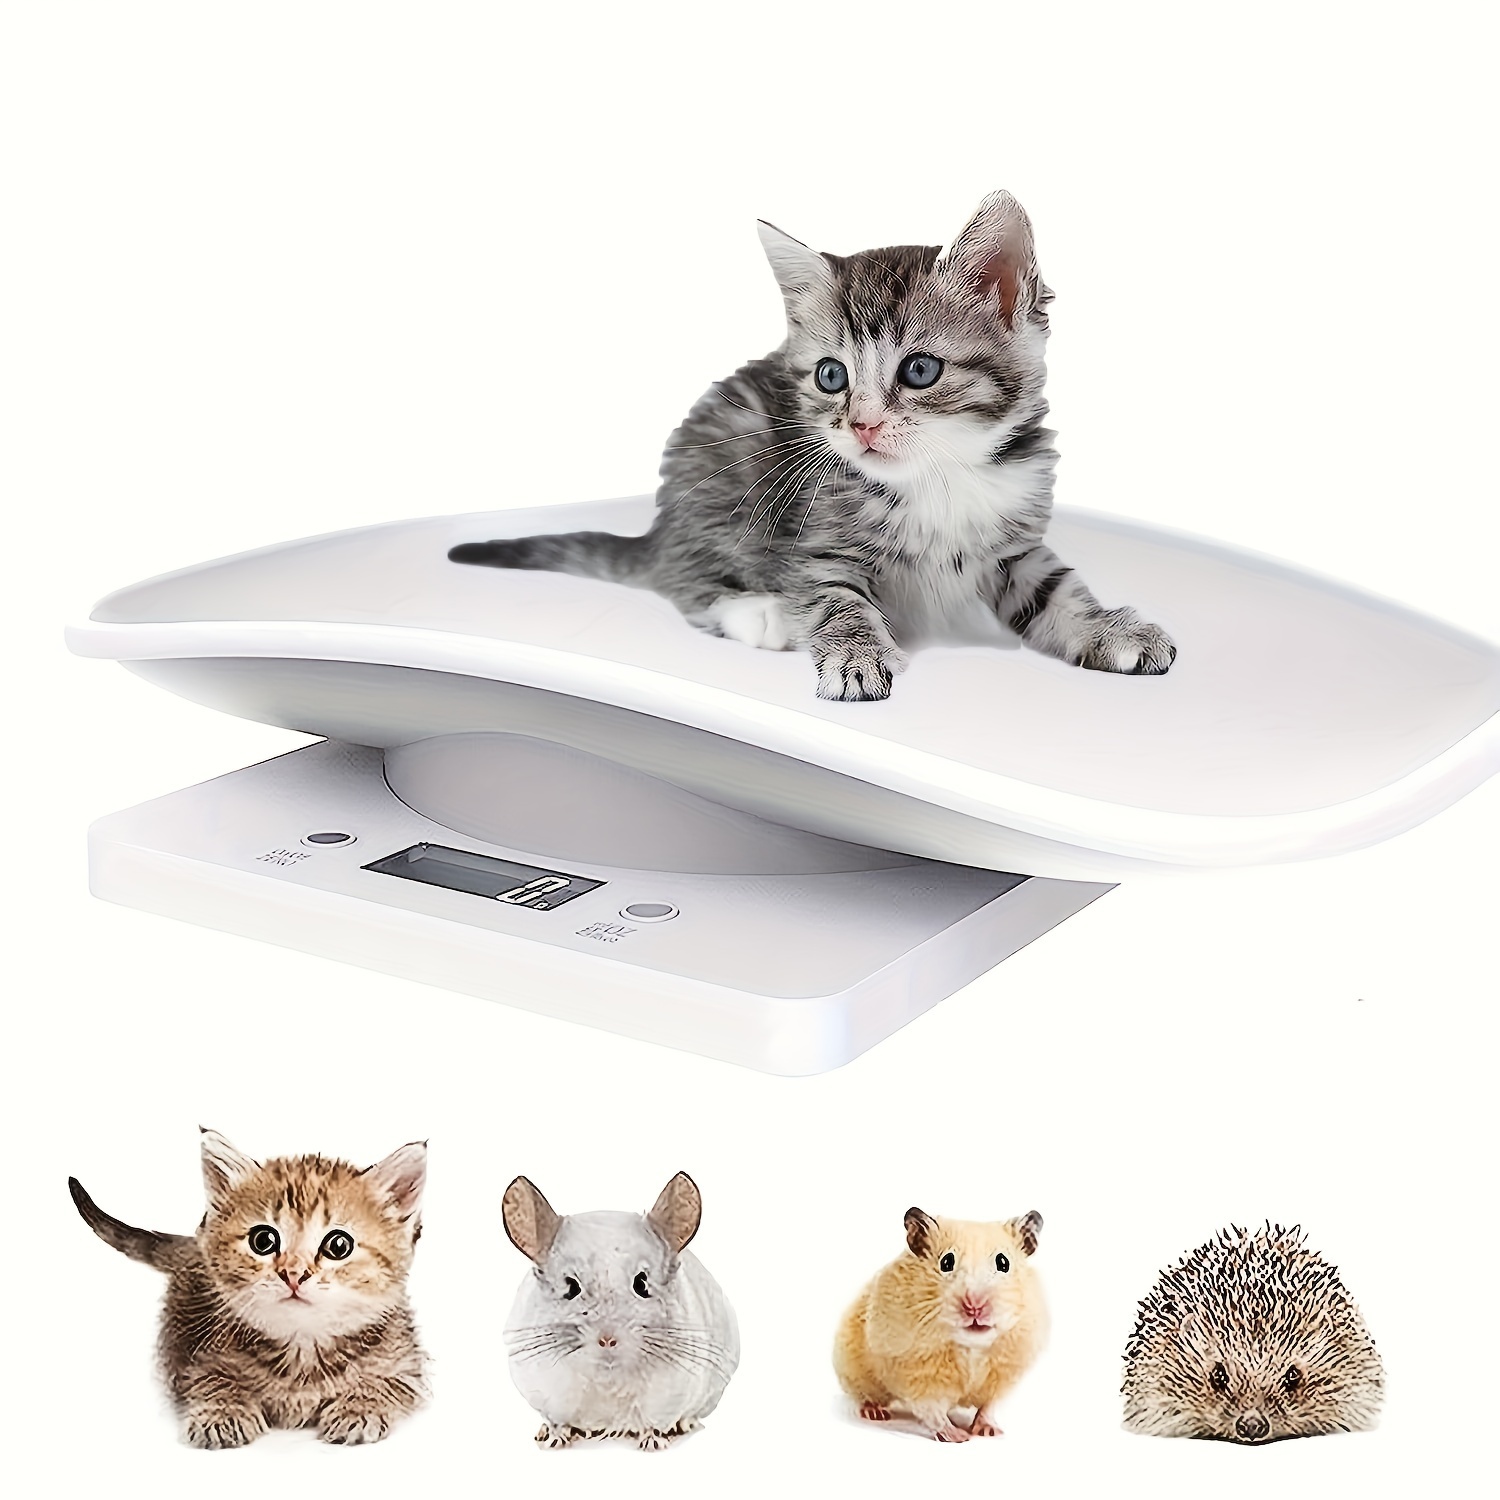  Digital Pet Scale for Puppy and Cats, Puppy Whelping